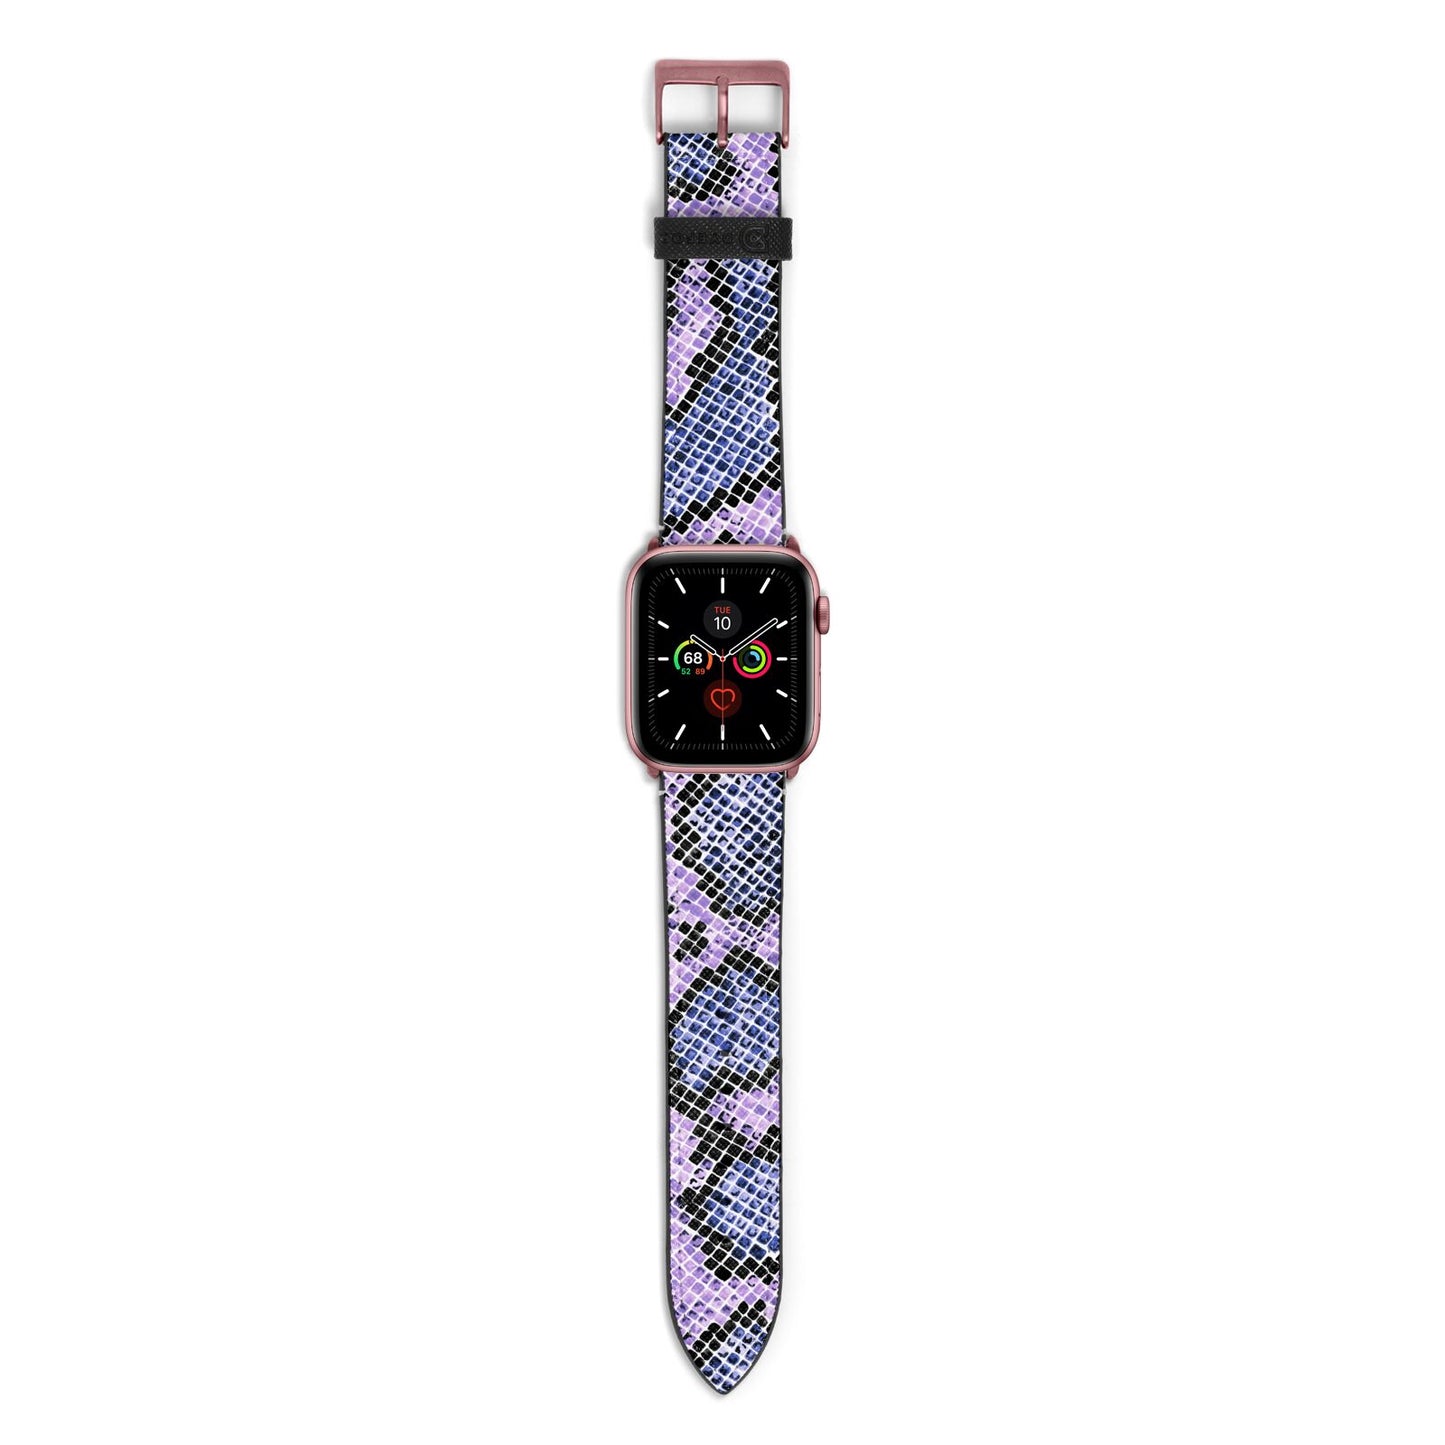 Purple And Blue Snakeskin Apple Watch Strap with Rose Gold Hardware